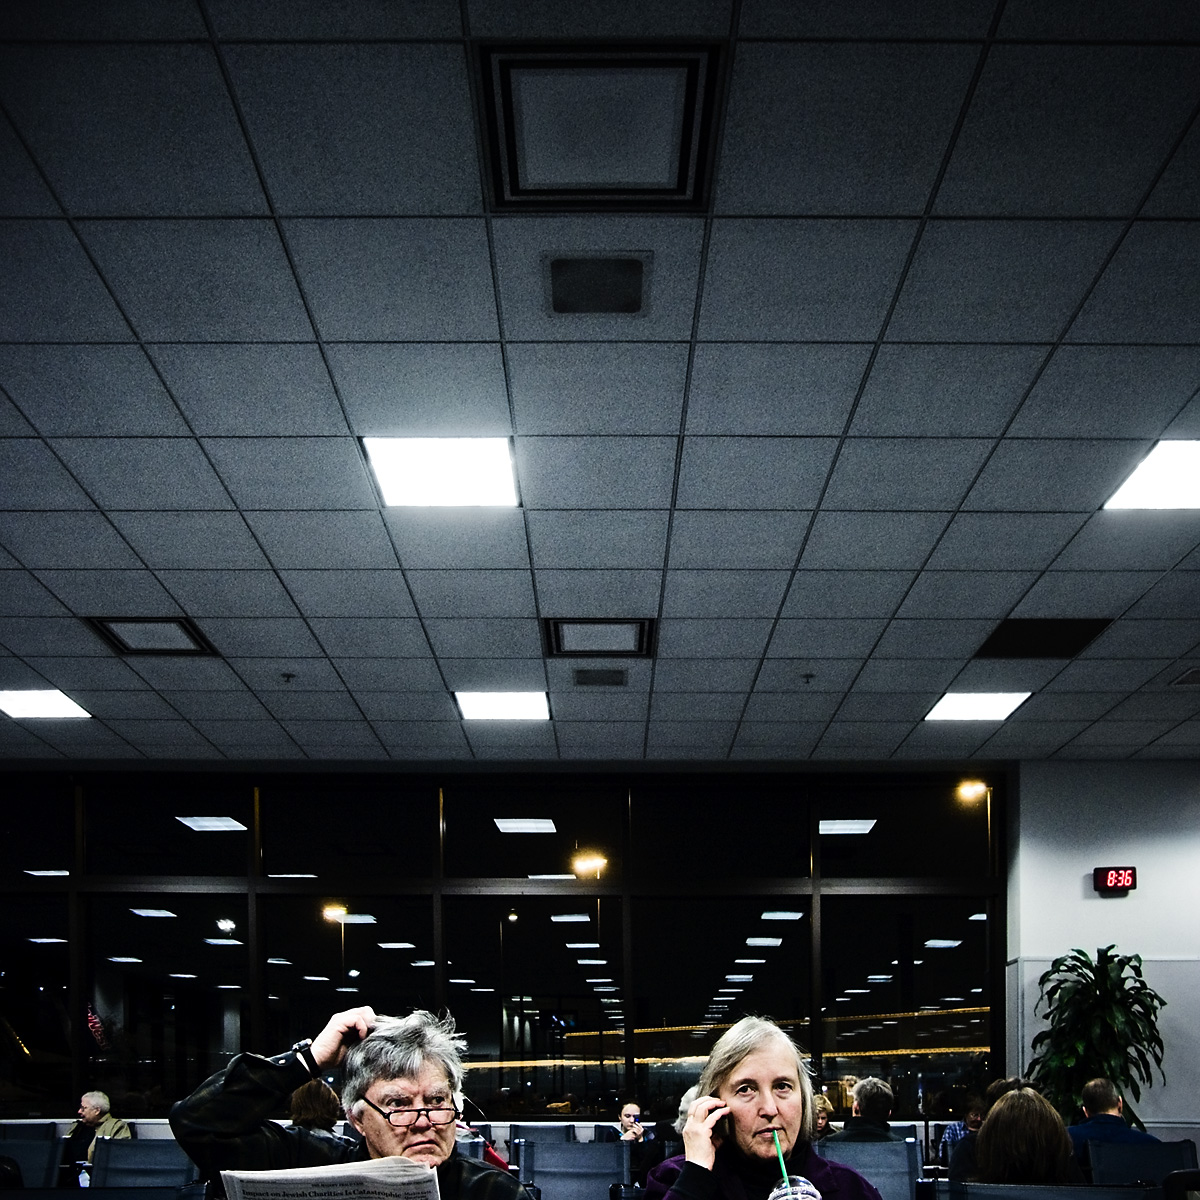 odd_couple_in_airport-stephen-austin-welch-director-photographer